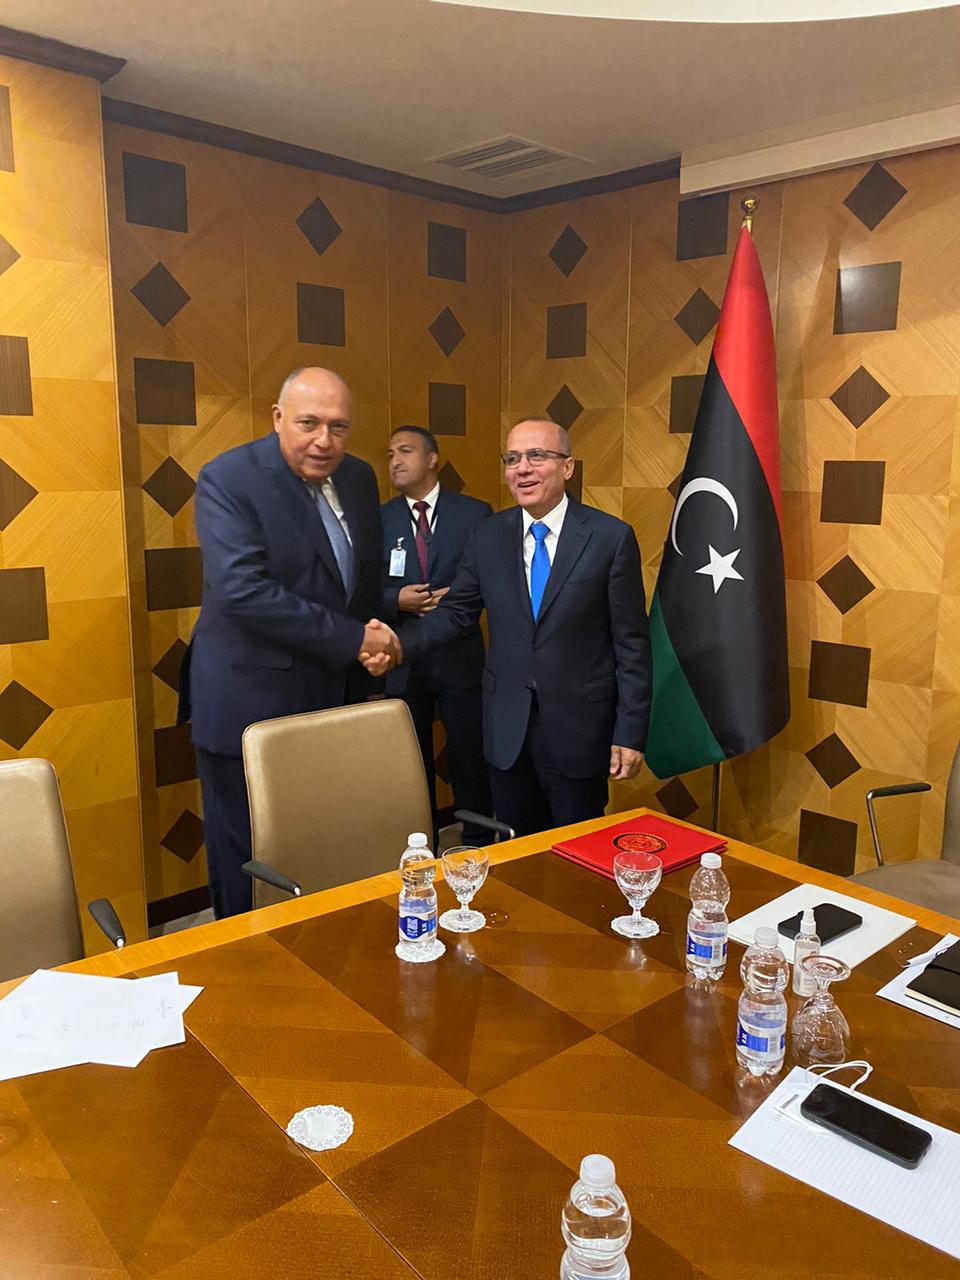 Deputy Head of the Libyan Presidential Council Abdallah al-Lafy (r) and Minister of Foreign Affairs Sameh Shokry in Tripoli on October 21, 2021. Press Photo